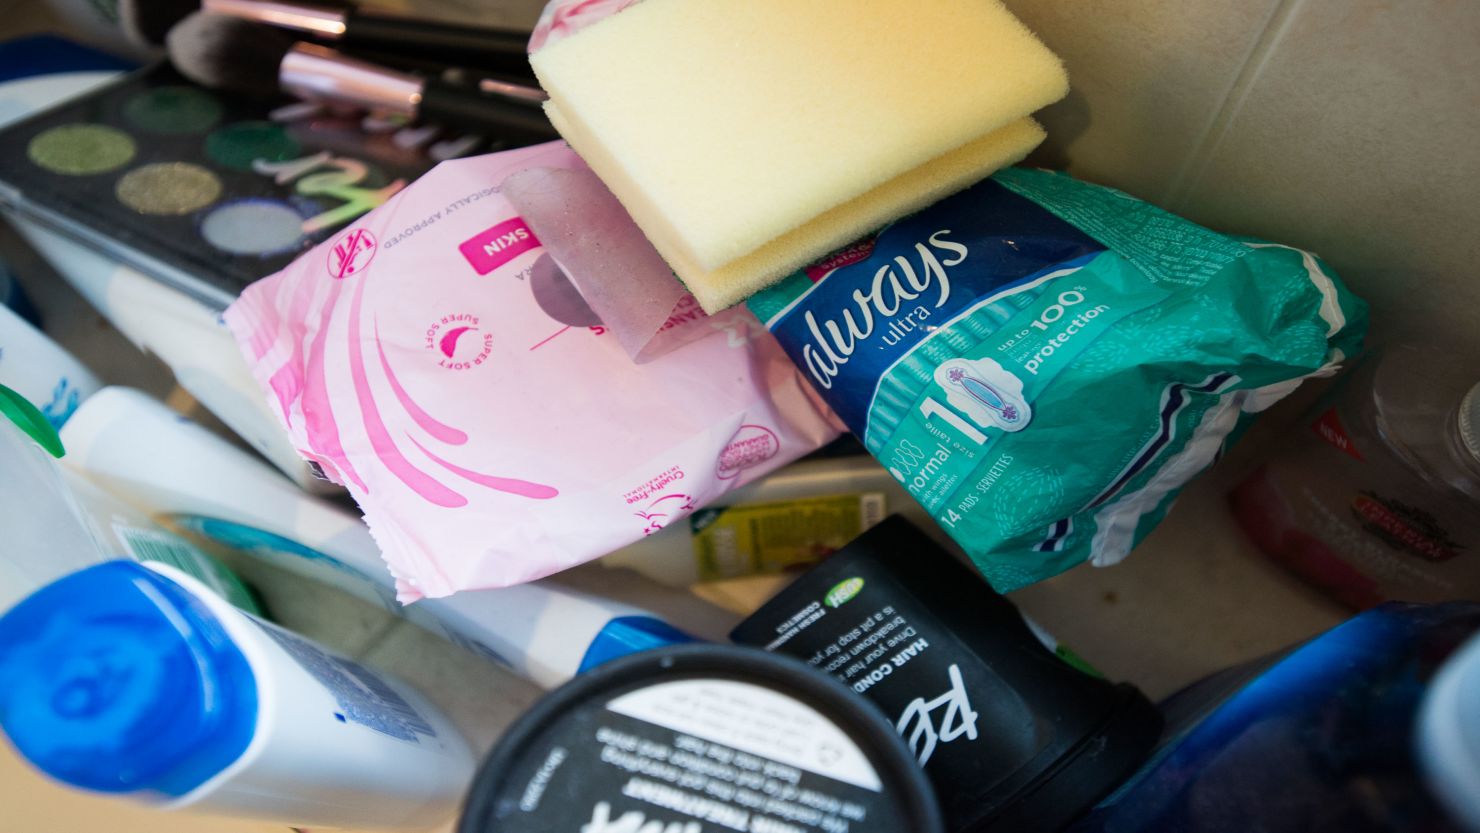 Australia's GST added 10% to the cost of feminine hygiene products.